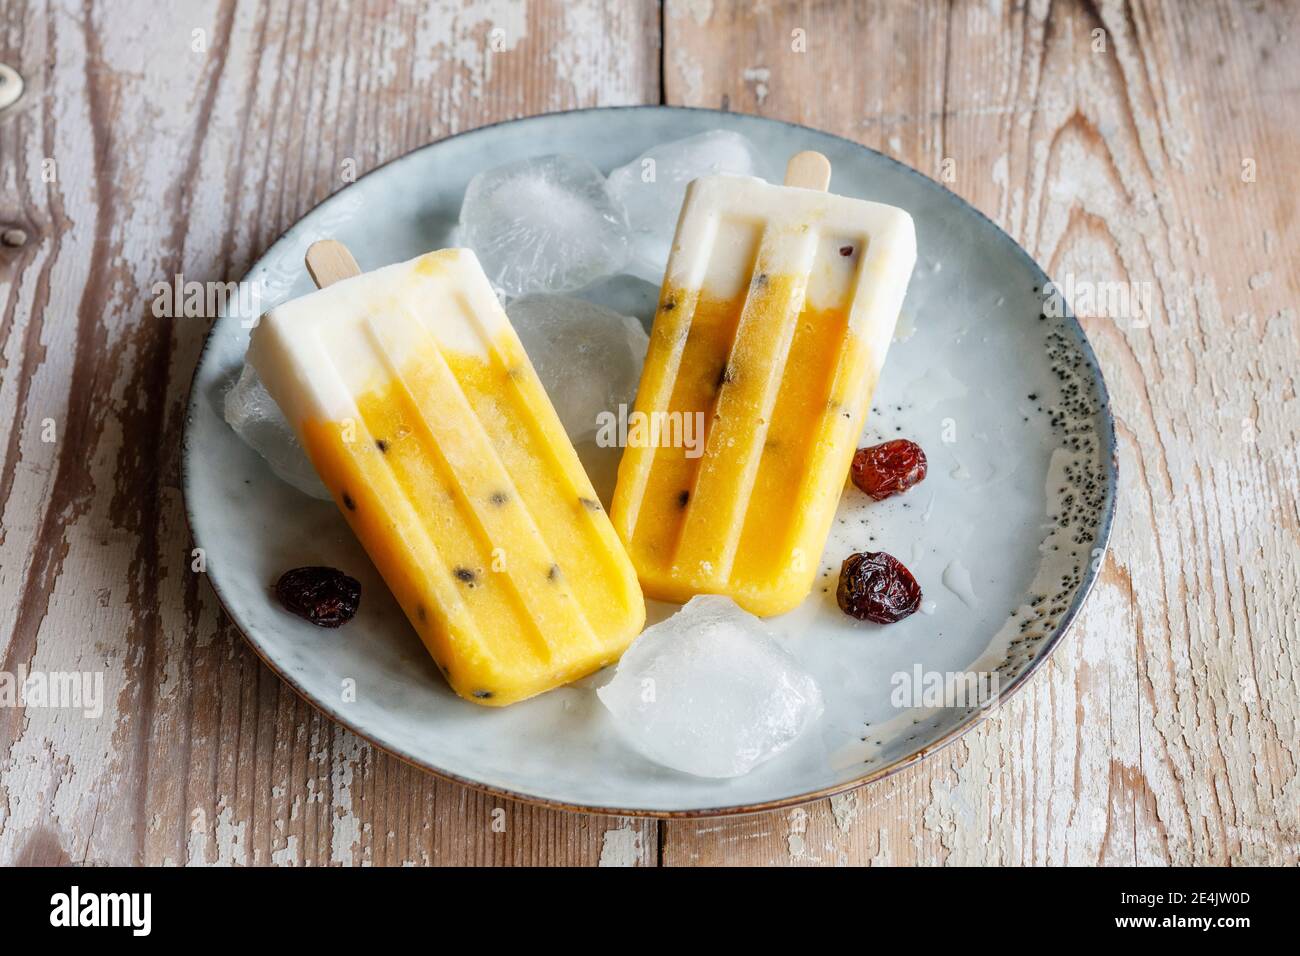 Homemade popsicles with mango and passion fruit Stock Photo